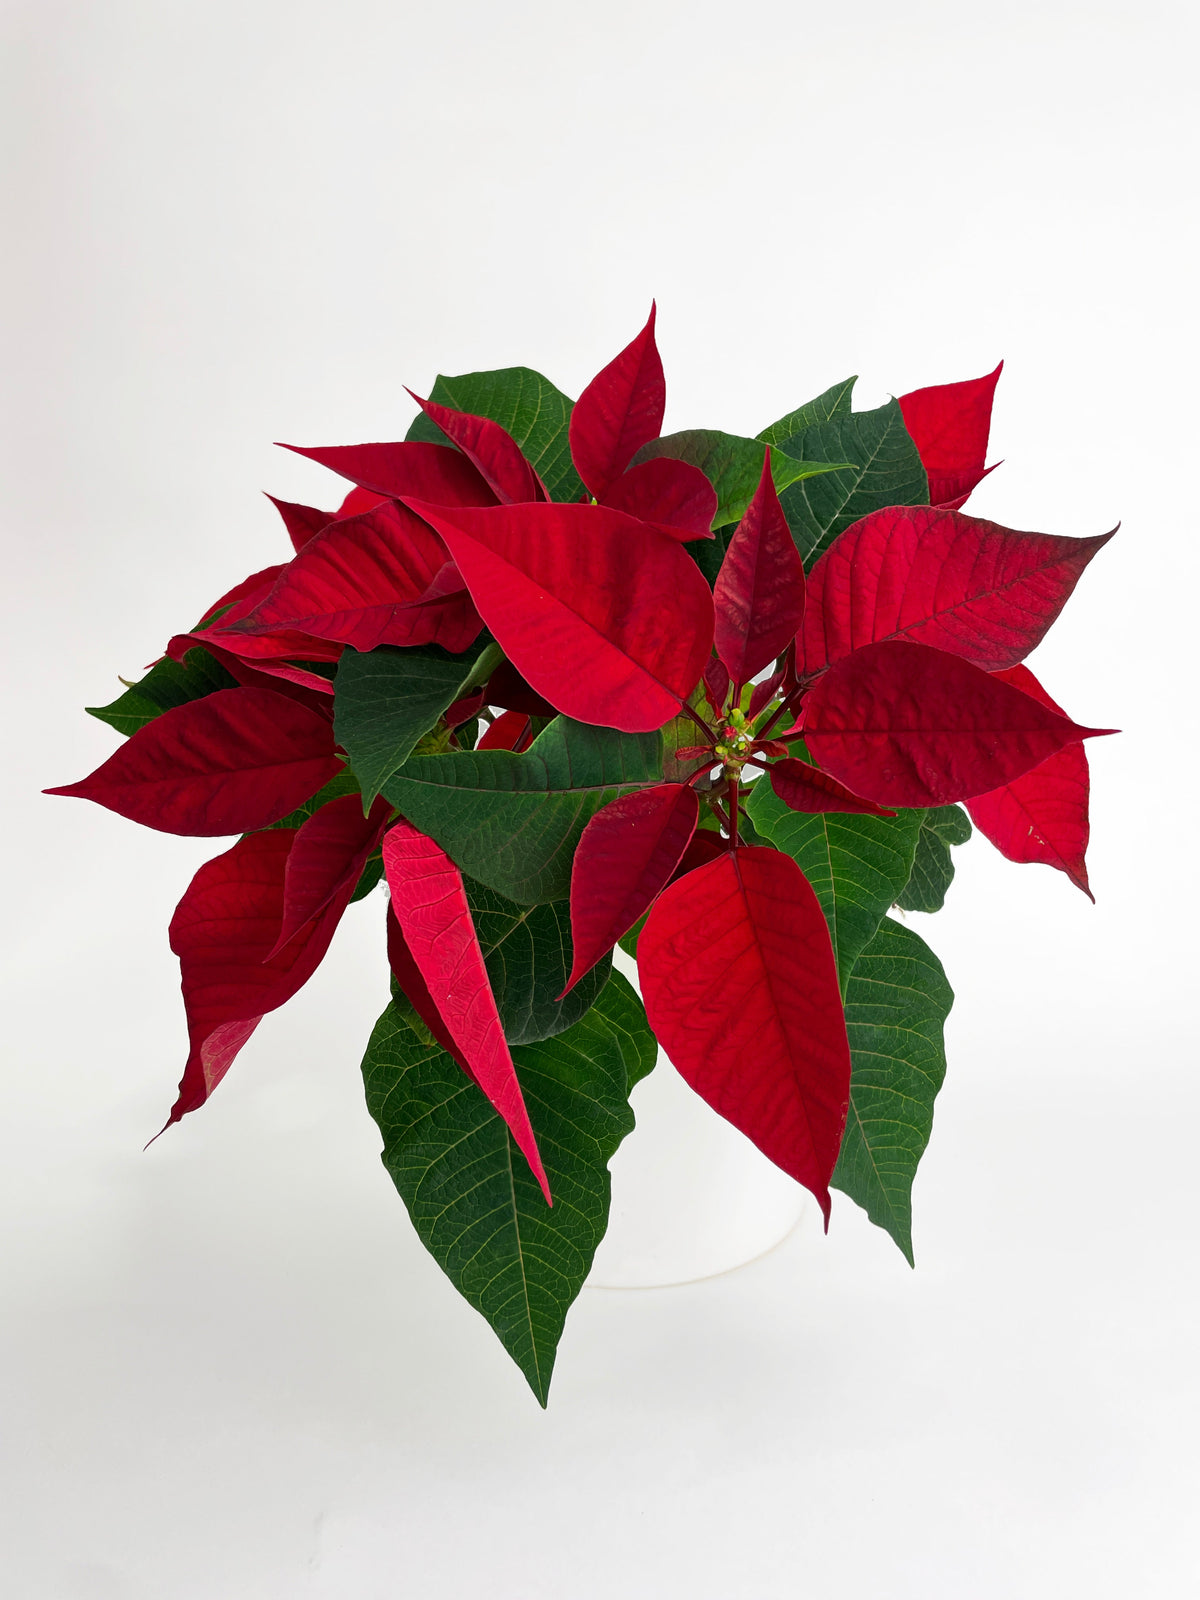 Poinsettia Christmas Plant by Bumble Plants